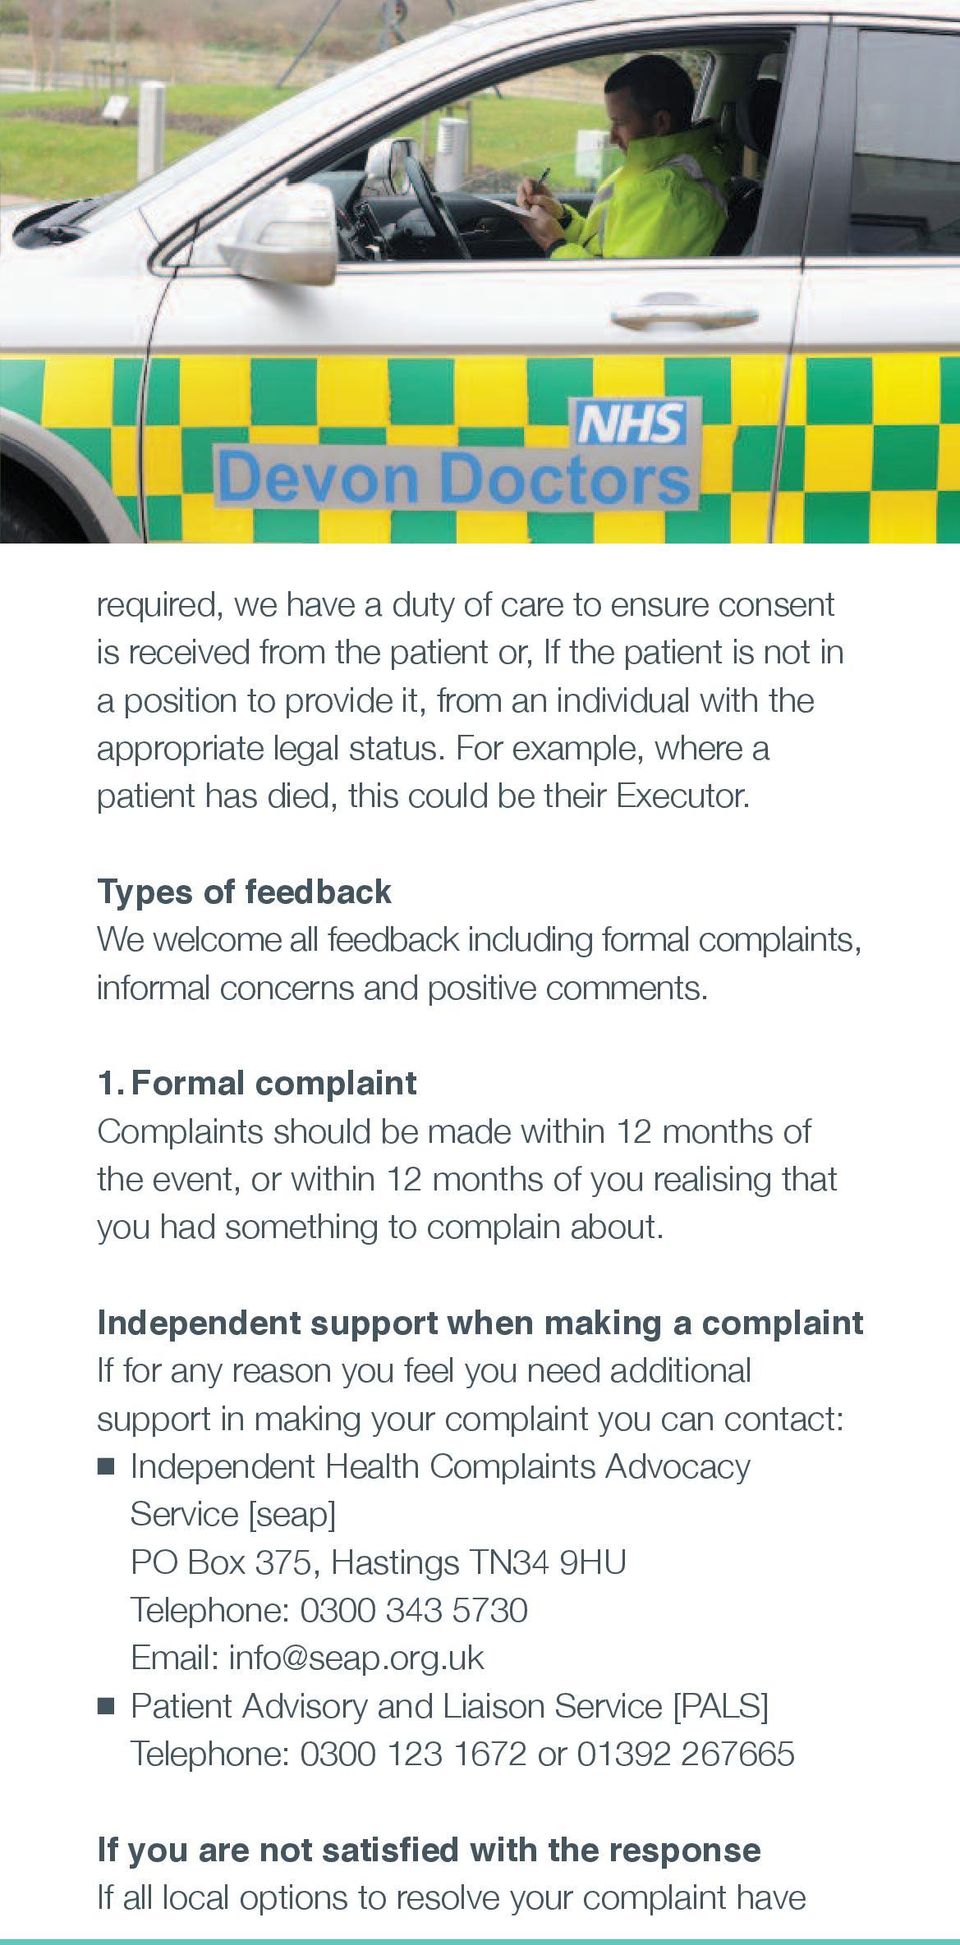 Formal complaint Complaints should be made within 12 months of the event, or within 12 months of you realising that you had something to complain about.